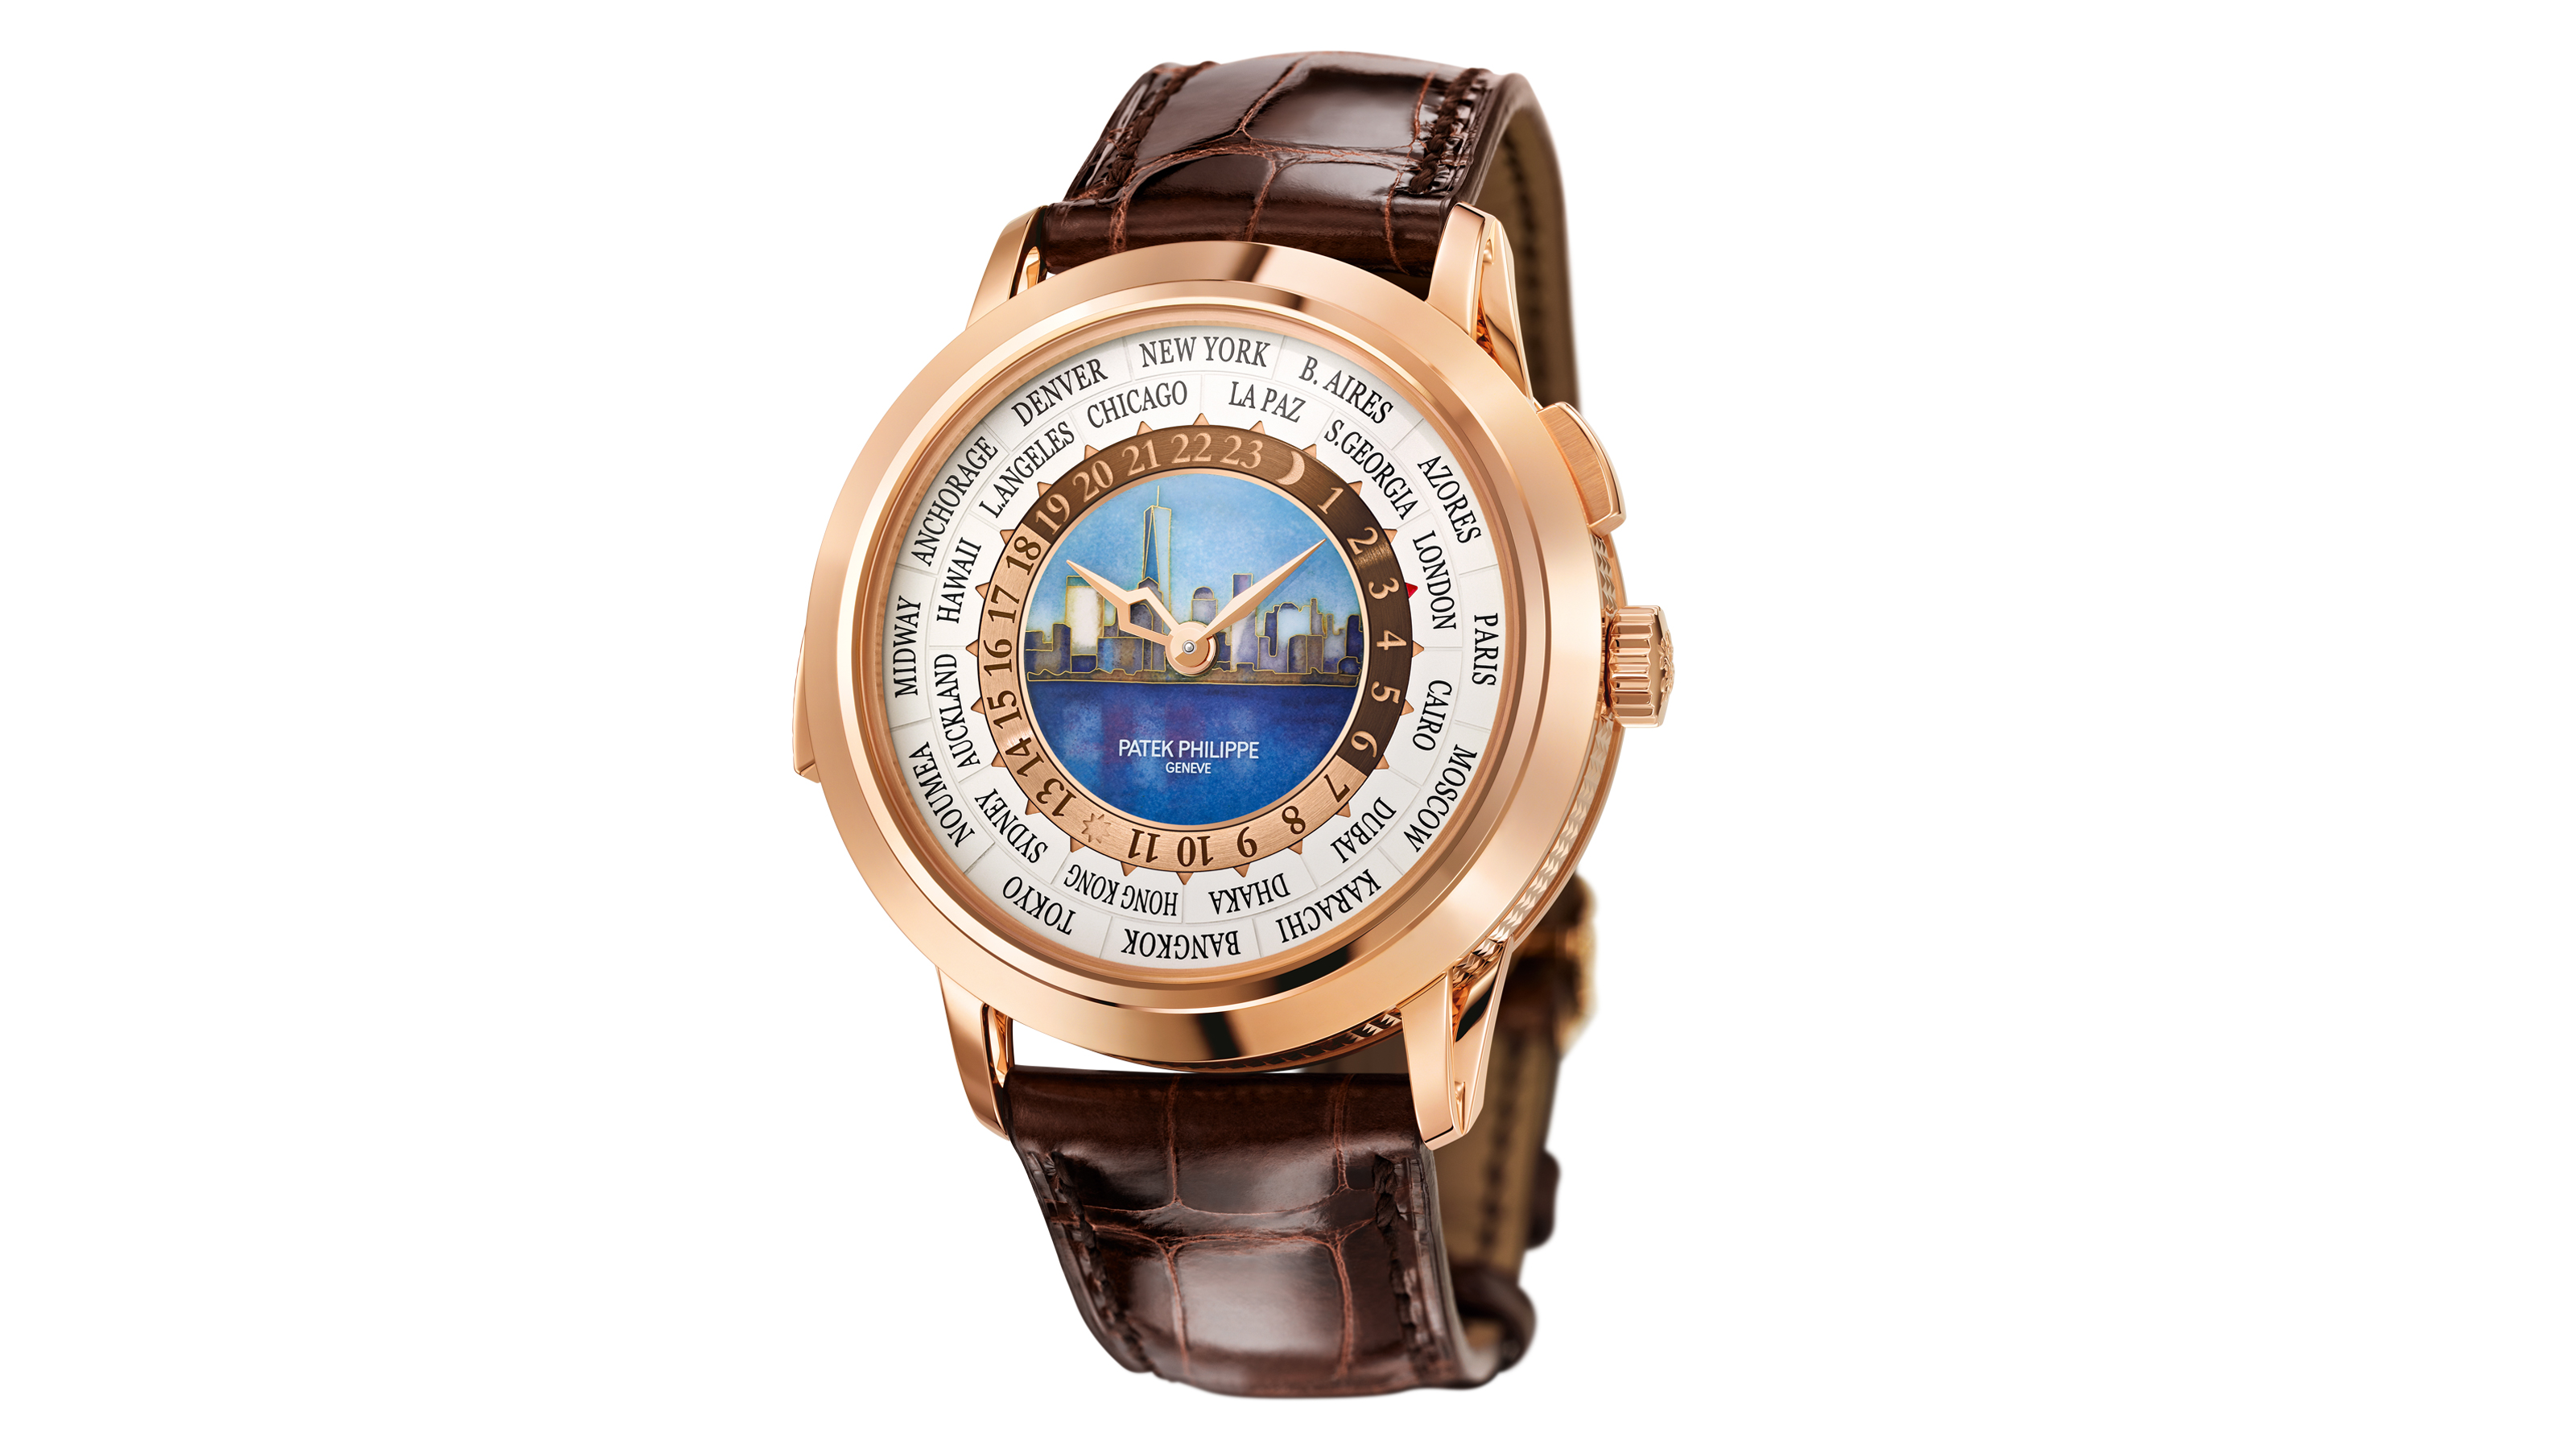 Introducing: The Patek Philippe Reference 5531R World Time Minute 